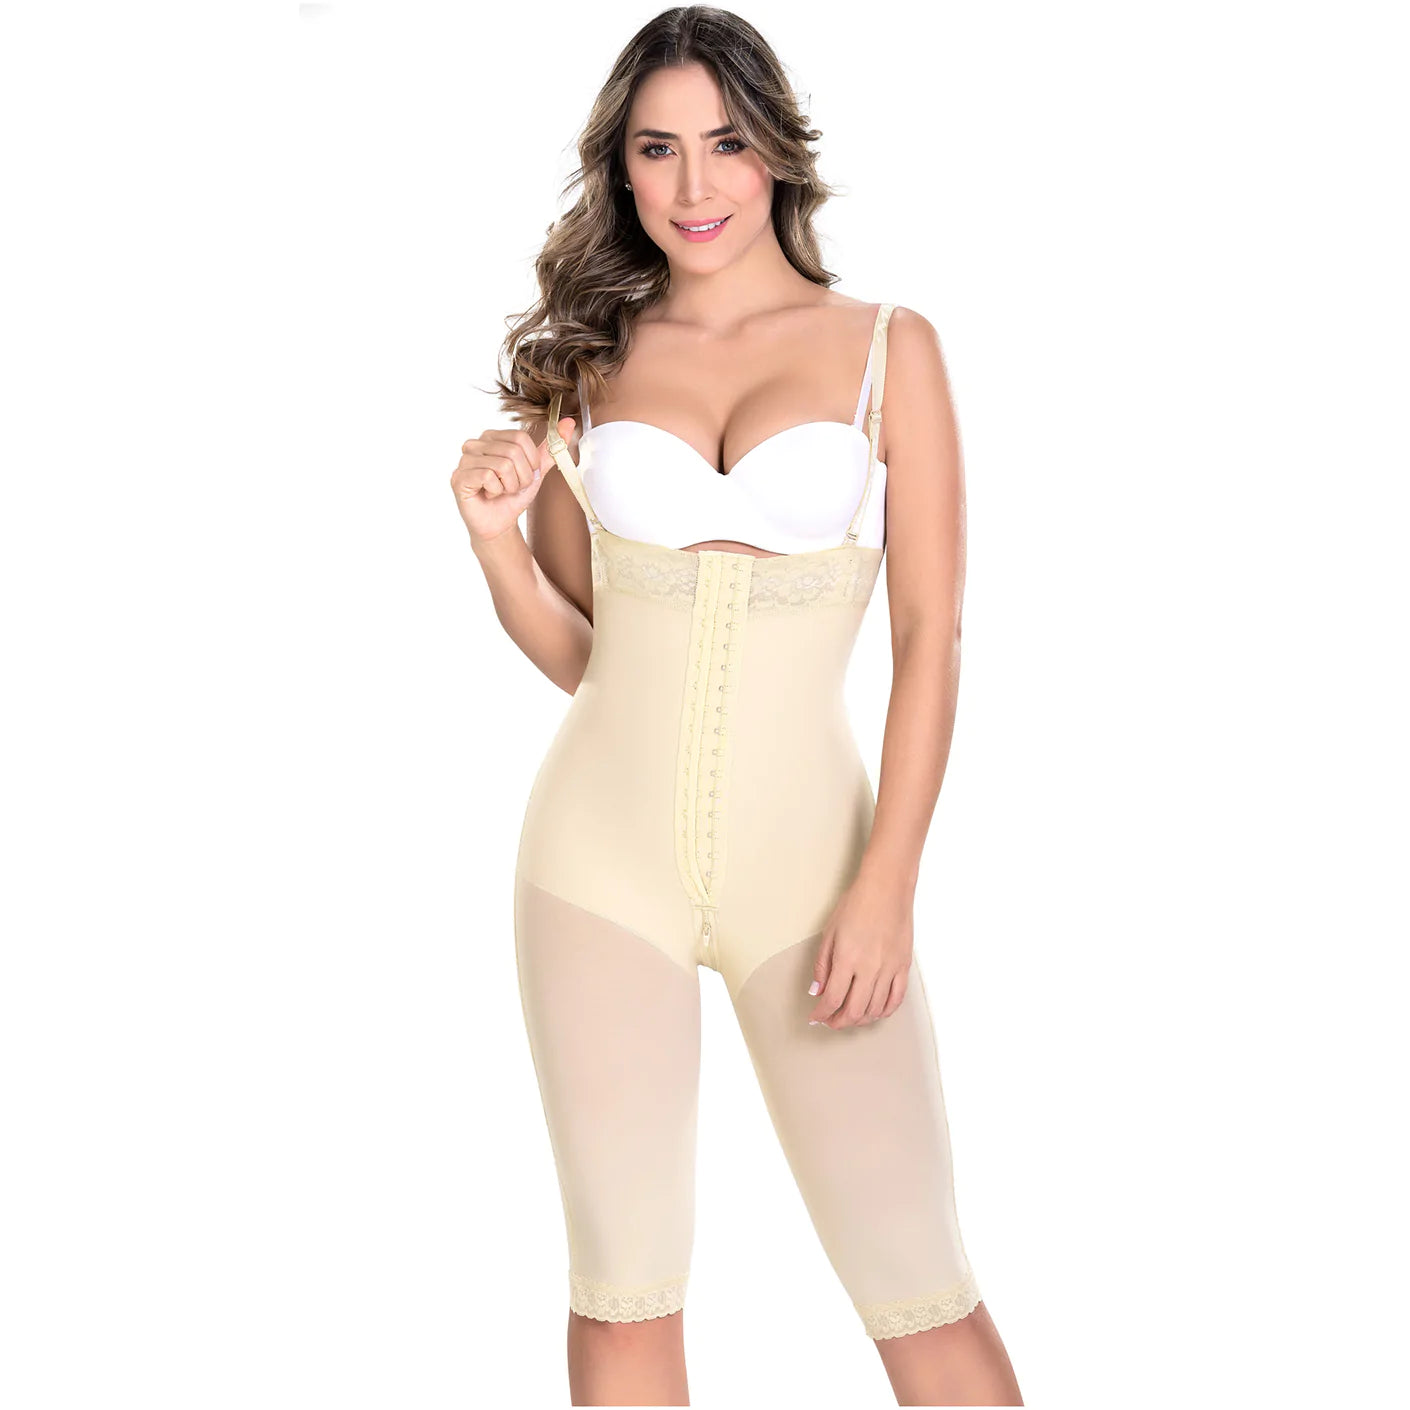 KNEE-LENGTH FAJA WITH BACK COVERAGE AND ADJUSTABLE STRAPS